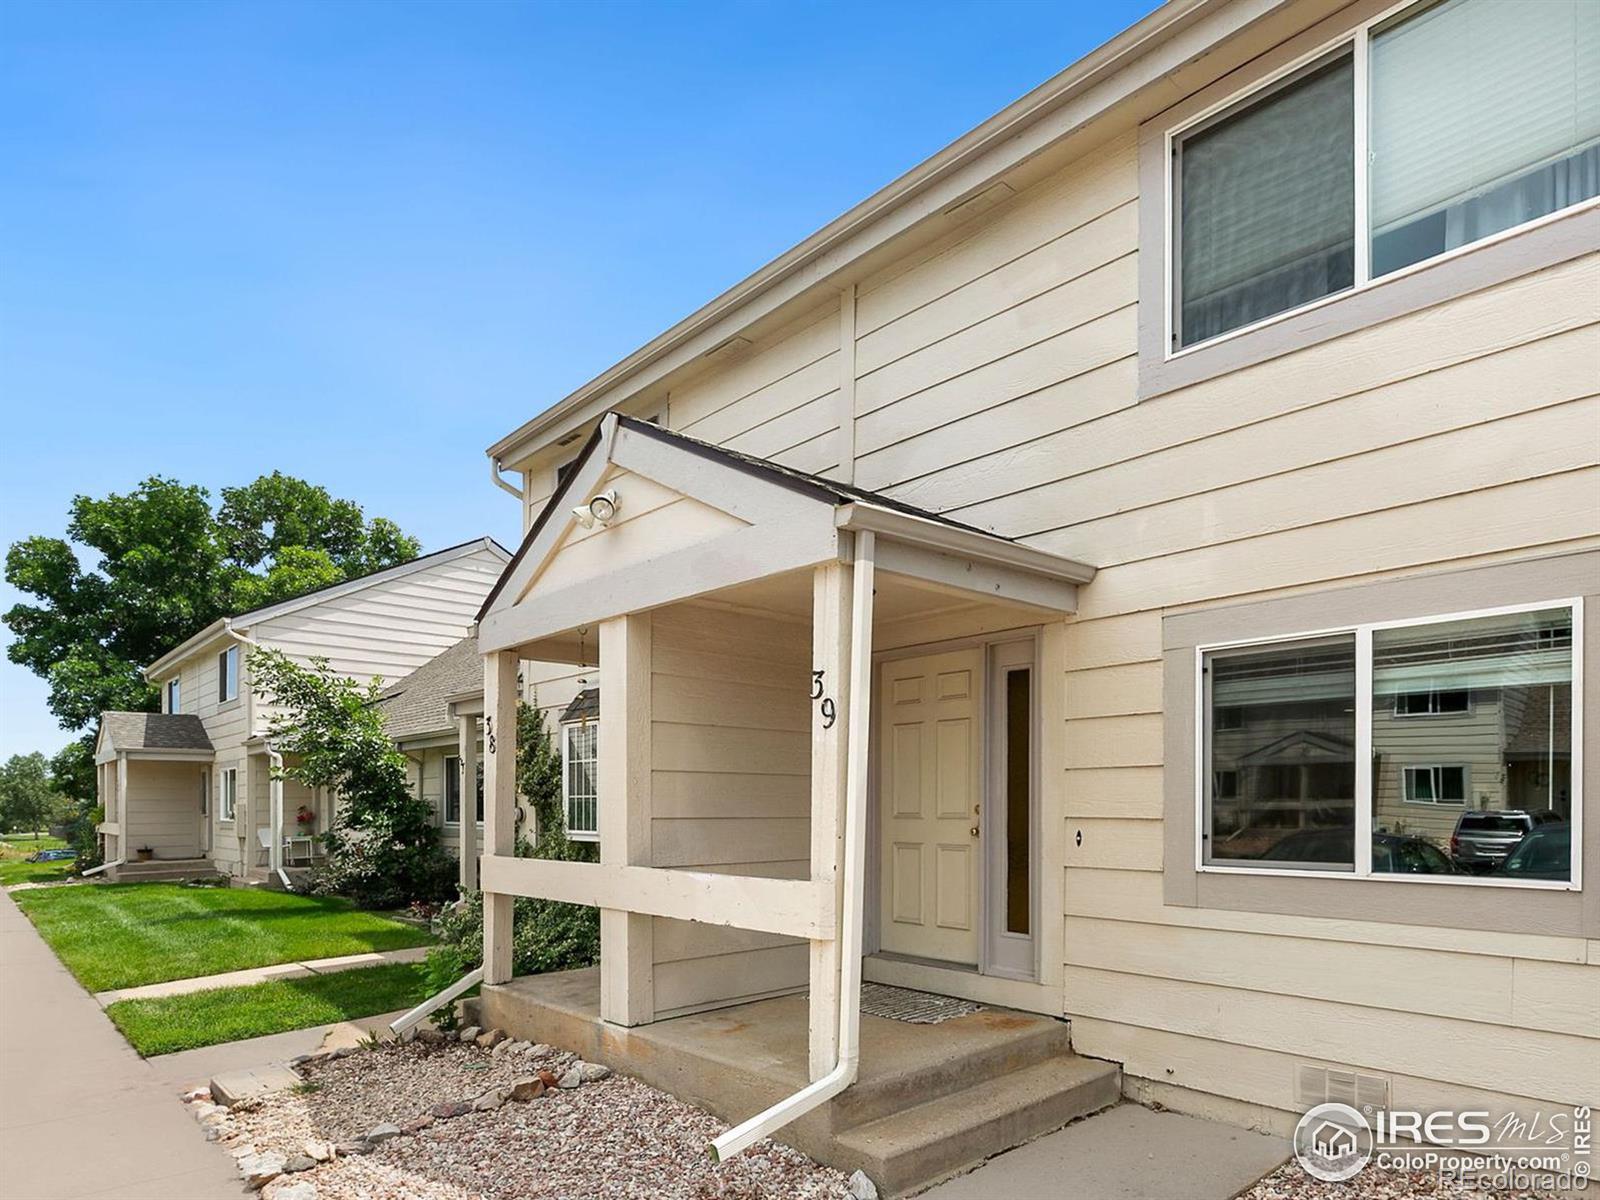 3000  Ross Drive, fort collins MLS: 123456789993324 Beds: 2 Baths: 2 Price: $315,000